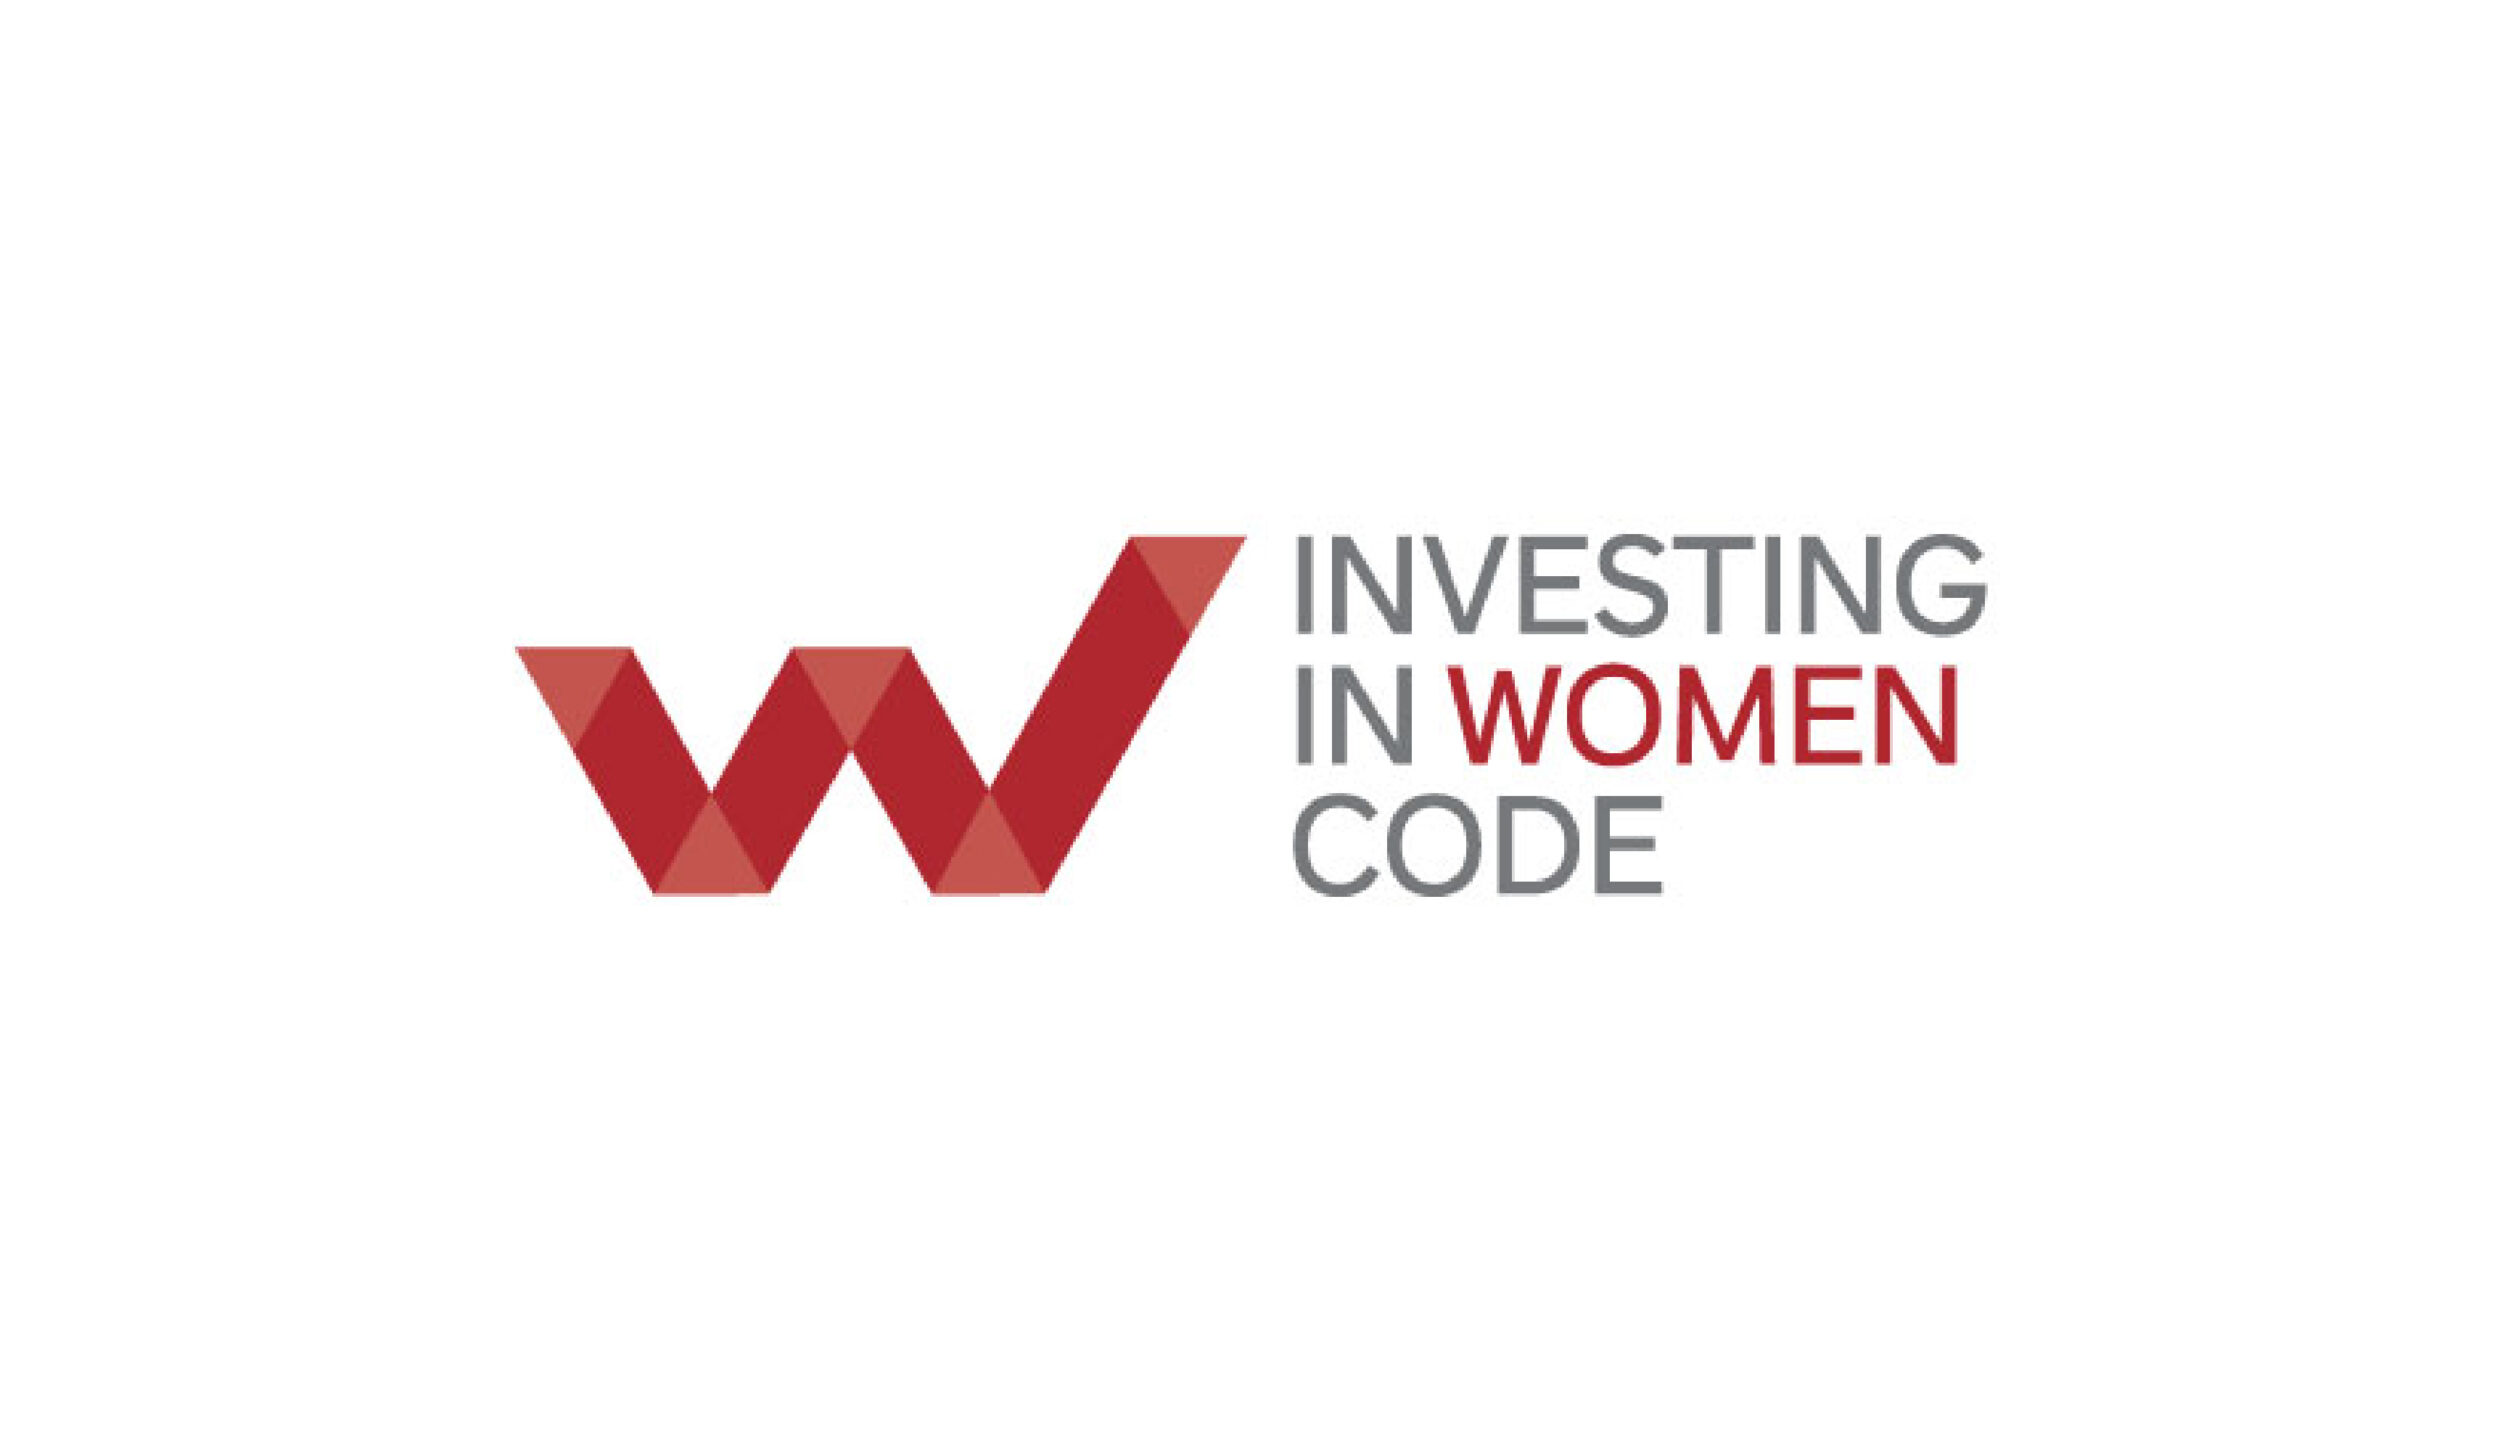 YFM joins Investing in Women Code committed to supporting women entrepreneurs